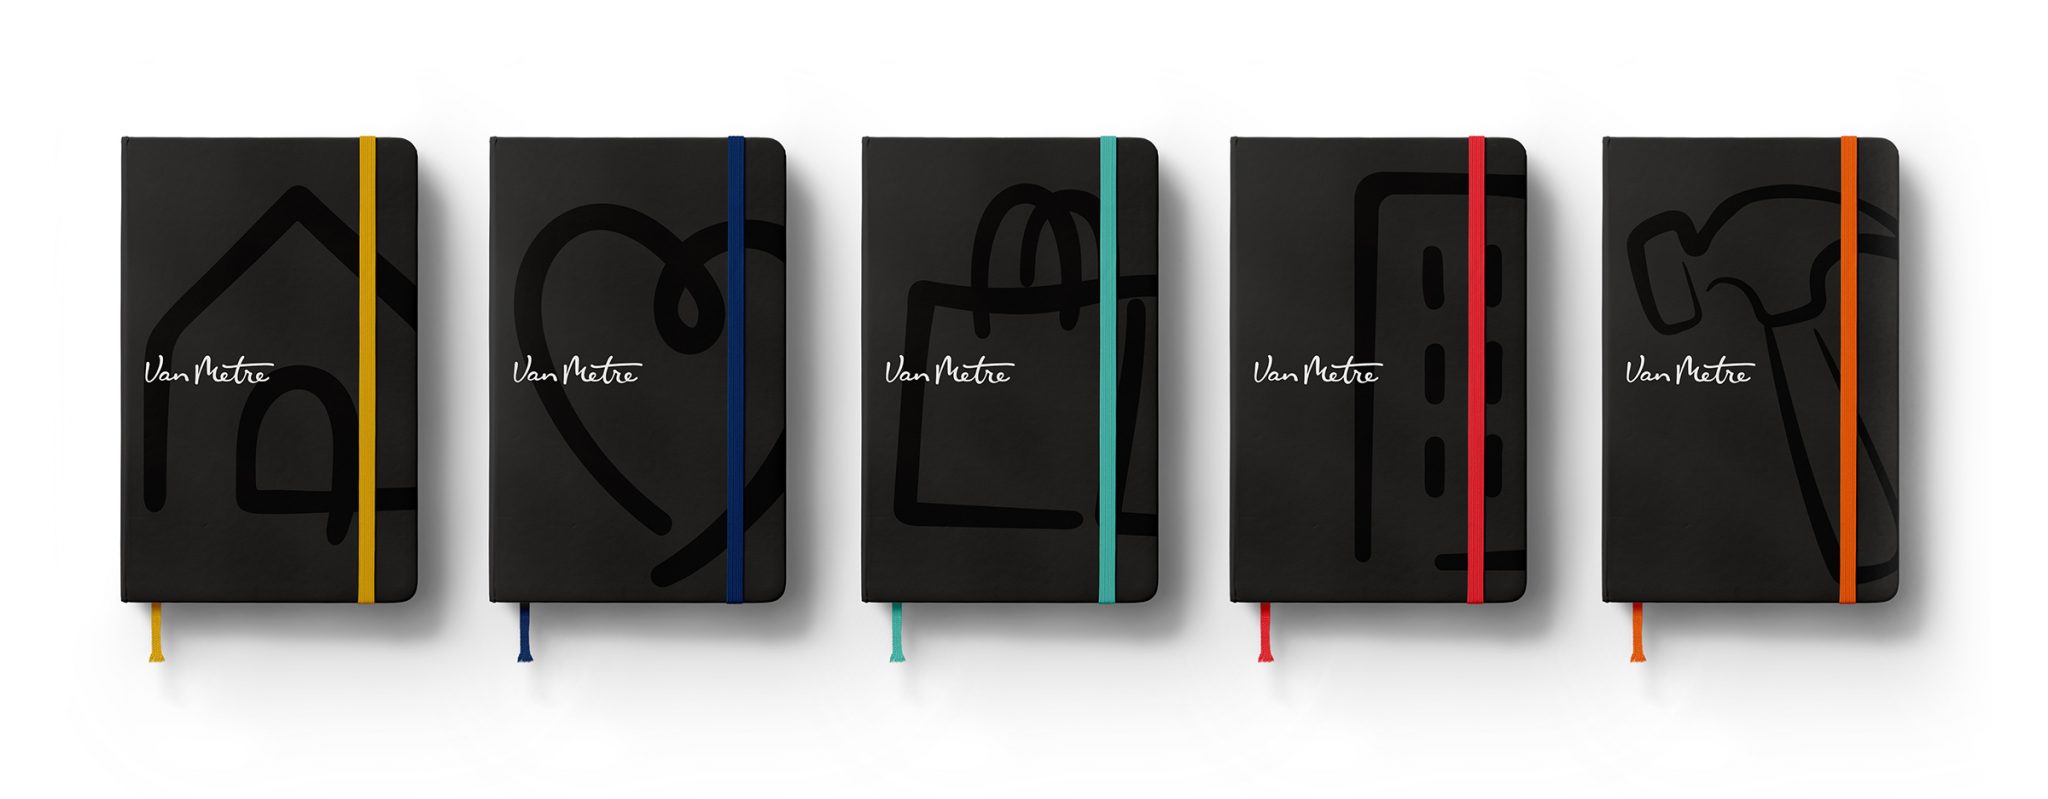 Van Metre notebooks with different cover graphics